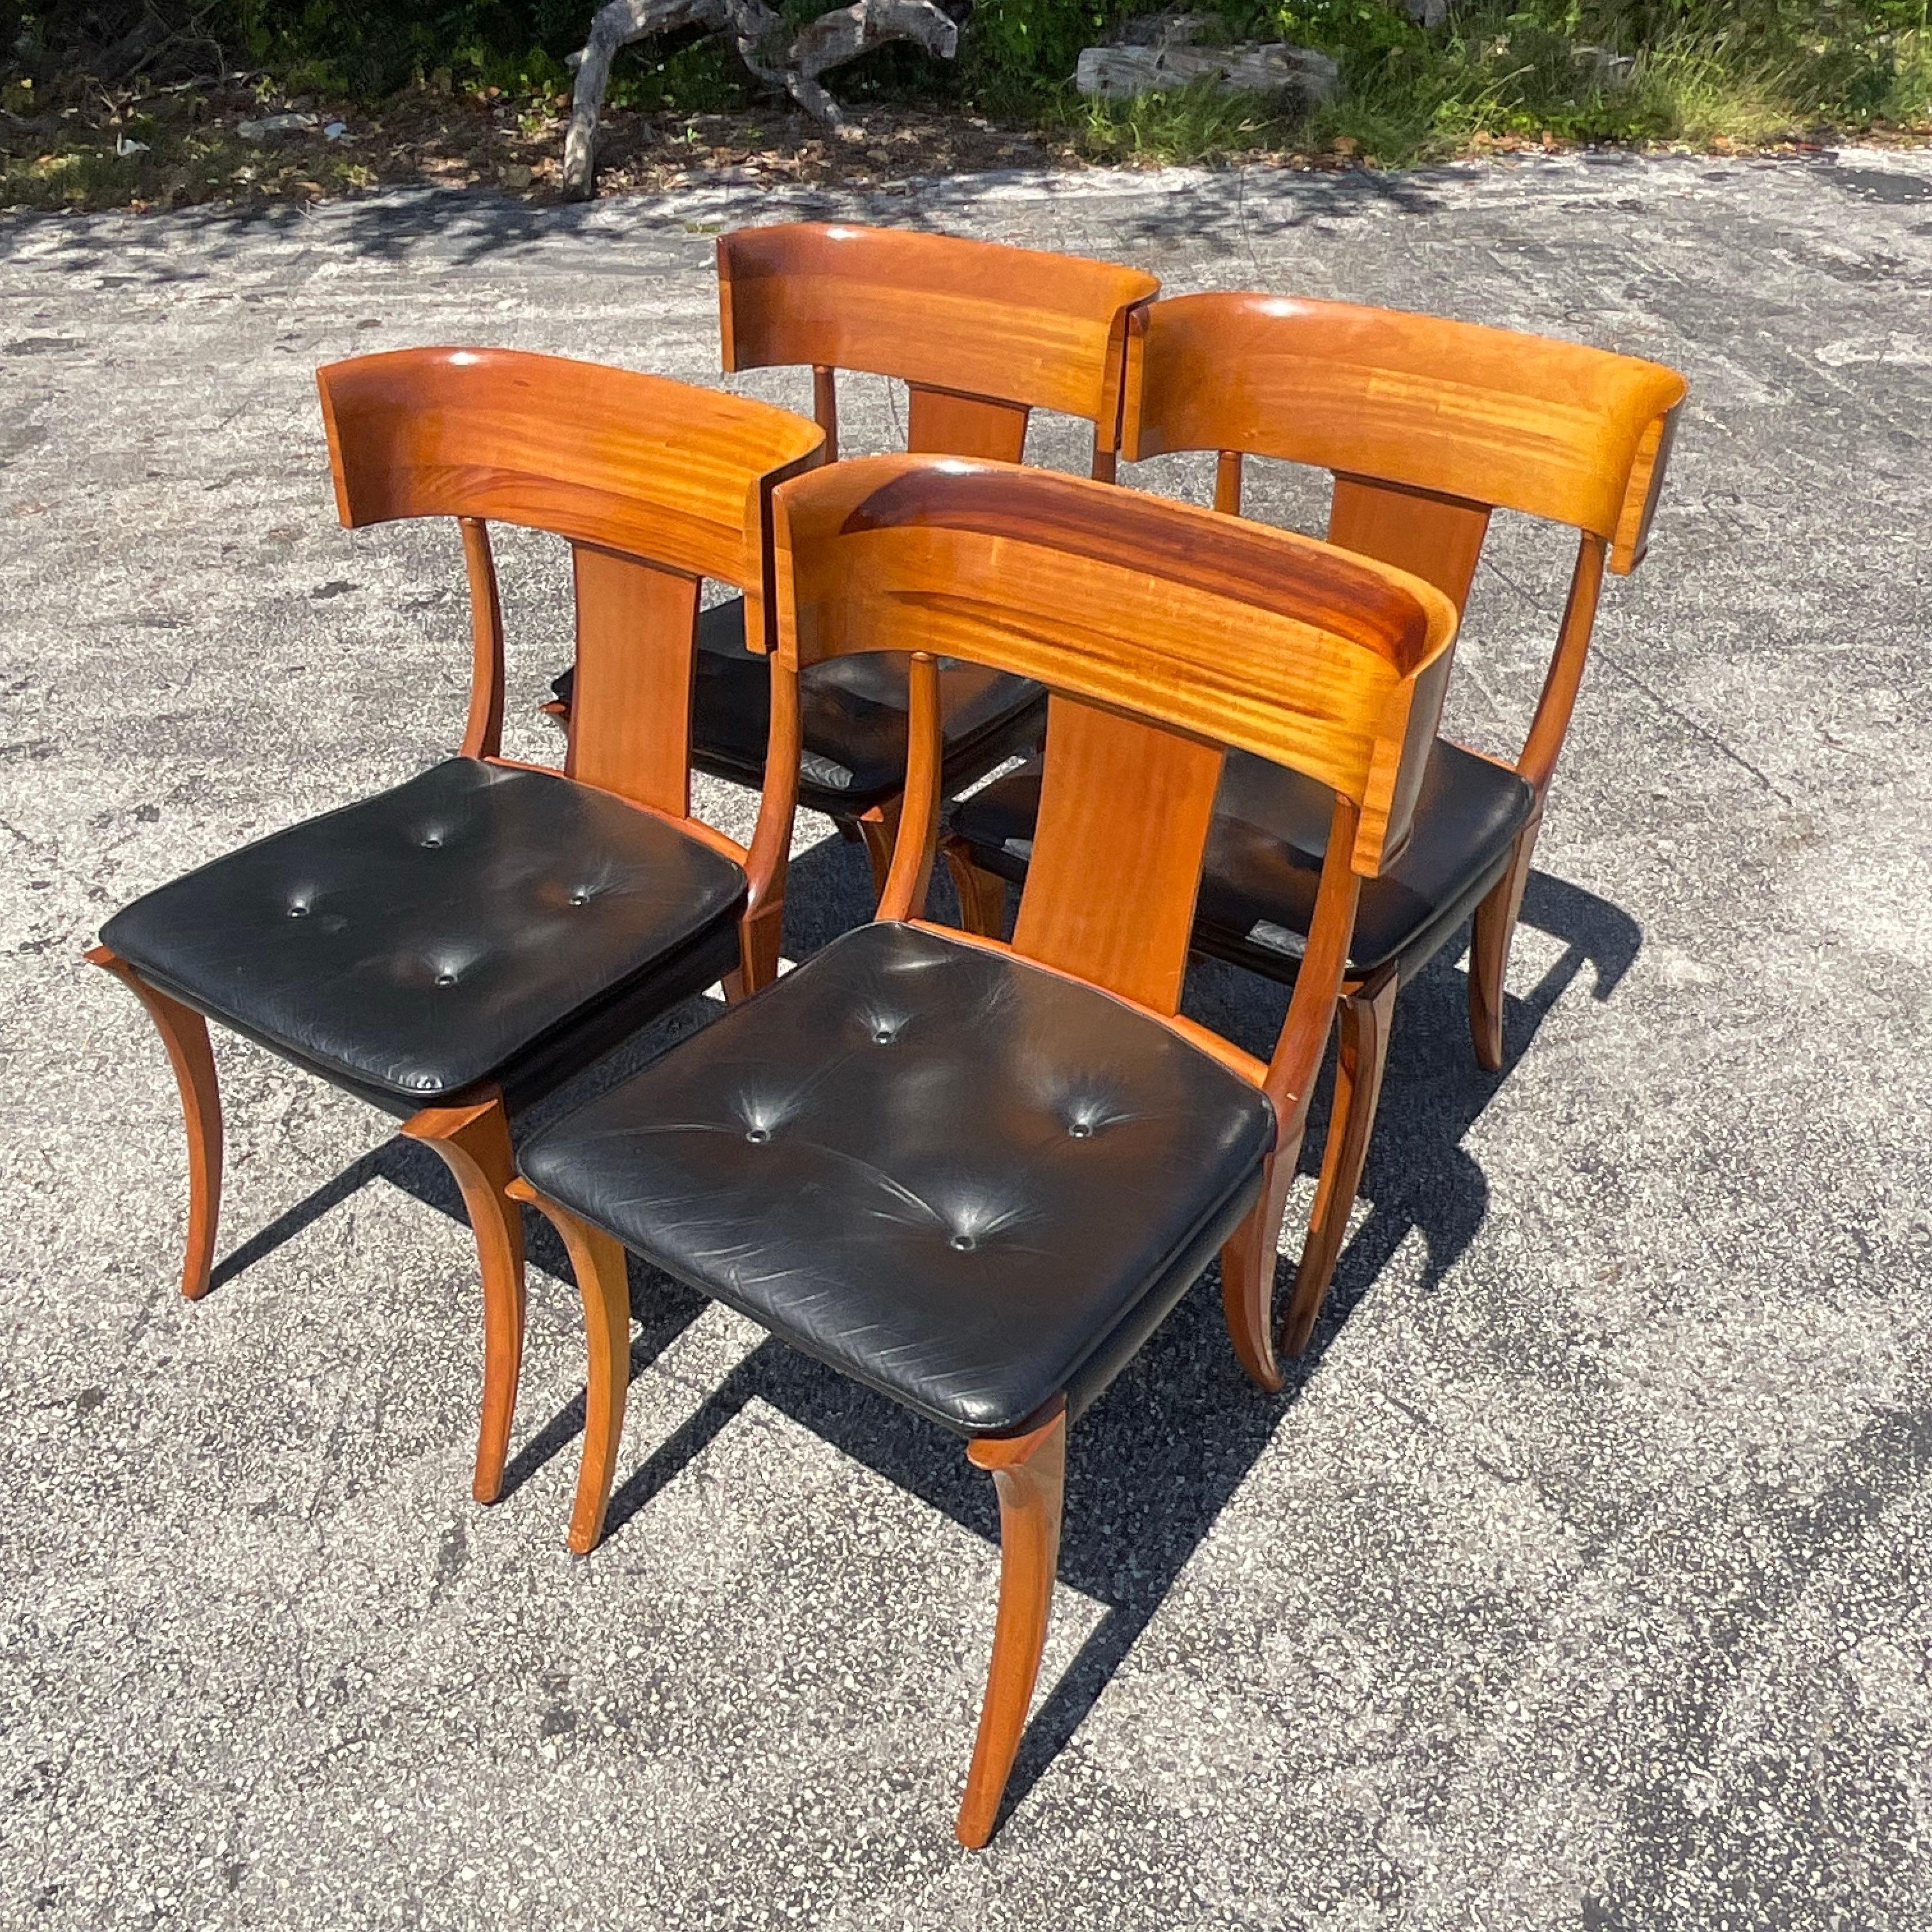 Vintage Neoclassical Klismos Dining Chairs After Kipp Stuart - Set of 4 For Sale 1